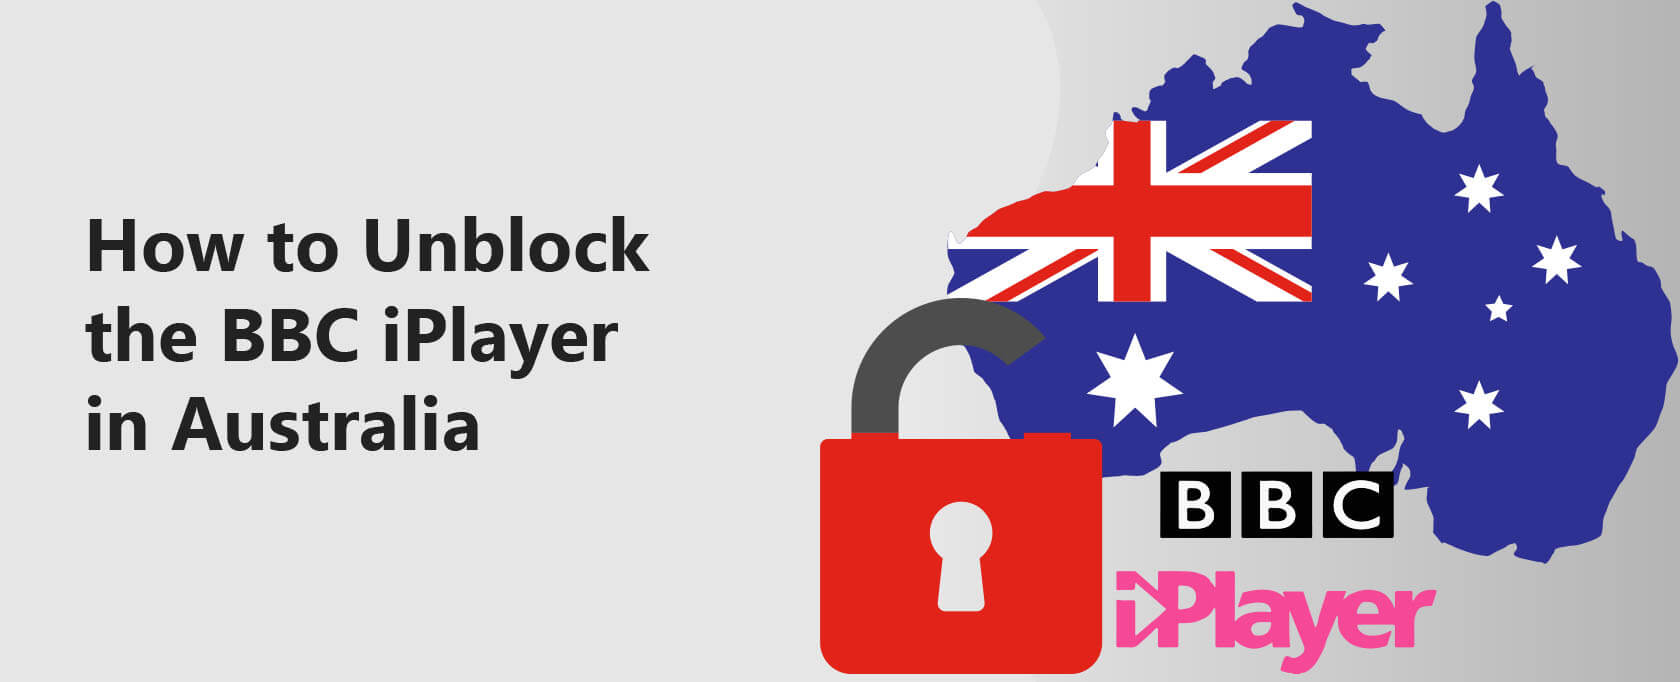 How to Unblock and Watch the BBC iPlayer in Australia